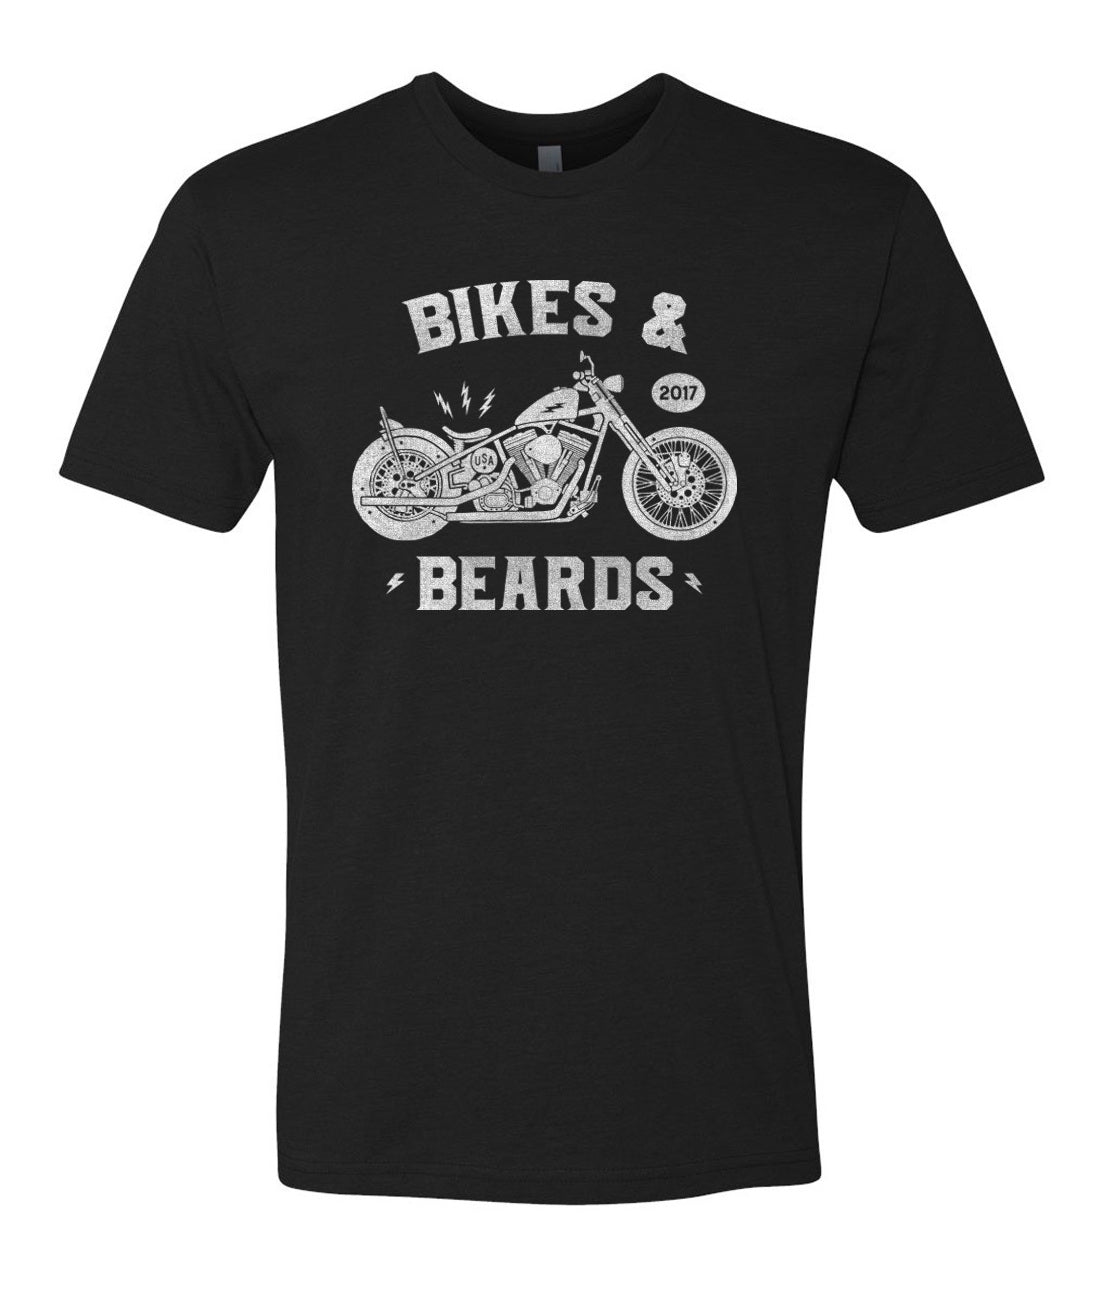 Black Friday Bikes and Beards Special Edition Tee